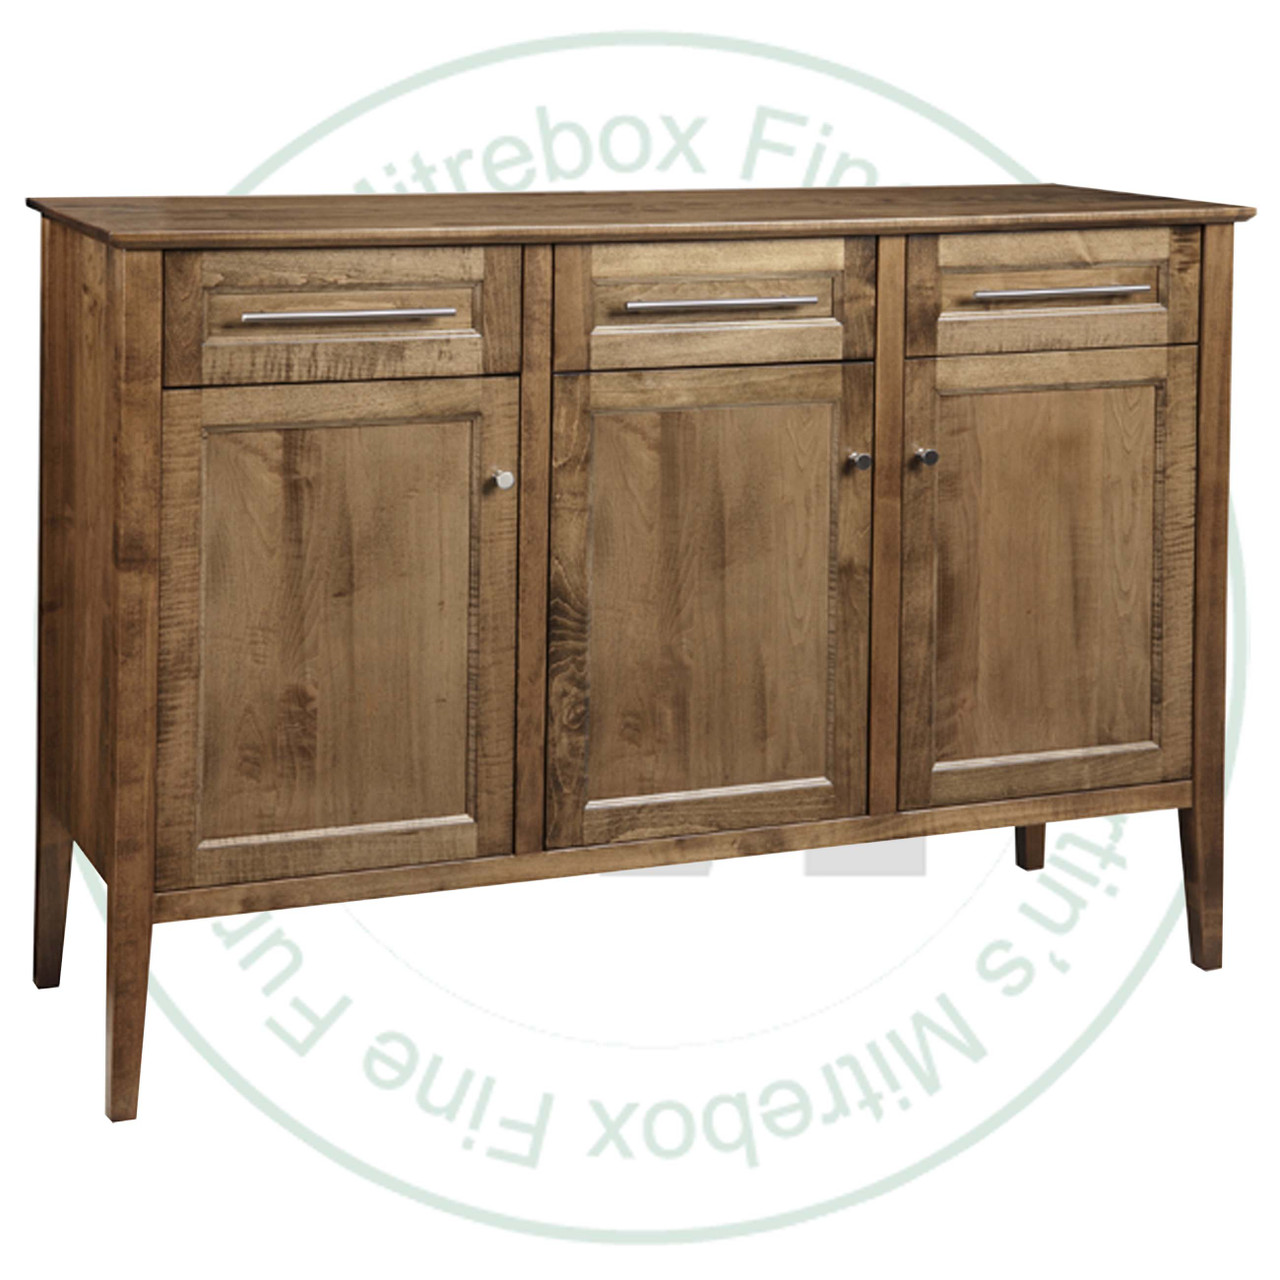 Wormy Maple Stockholm Sideboard 19.5''D x 59''W x 42''H With 3 Drawers And 3 Doors.